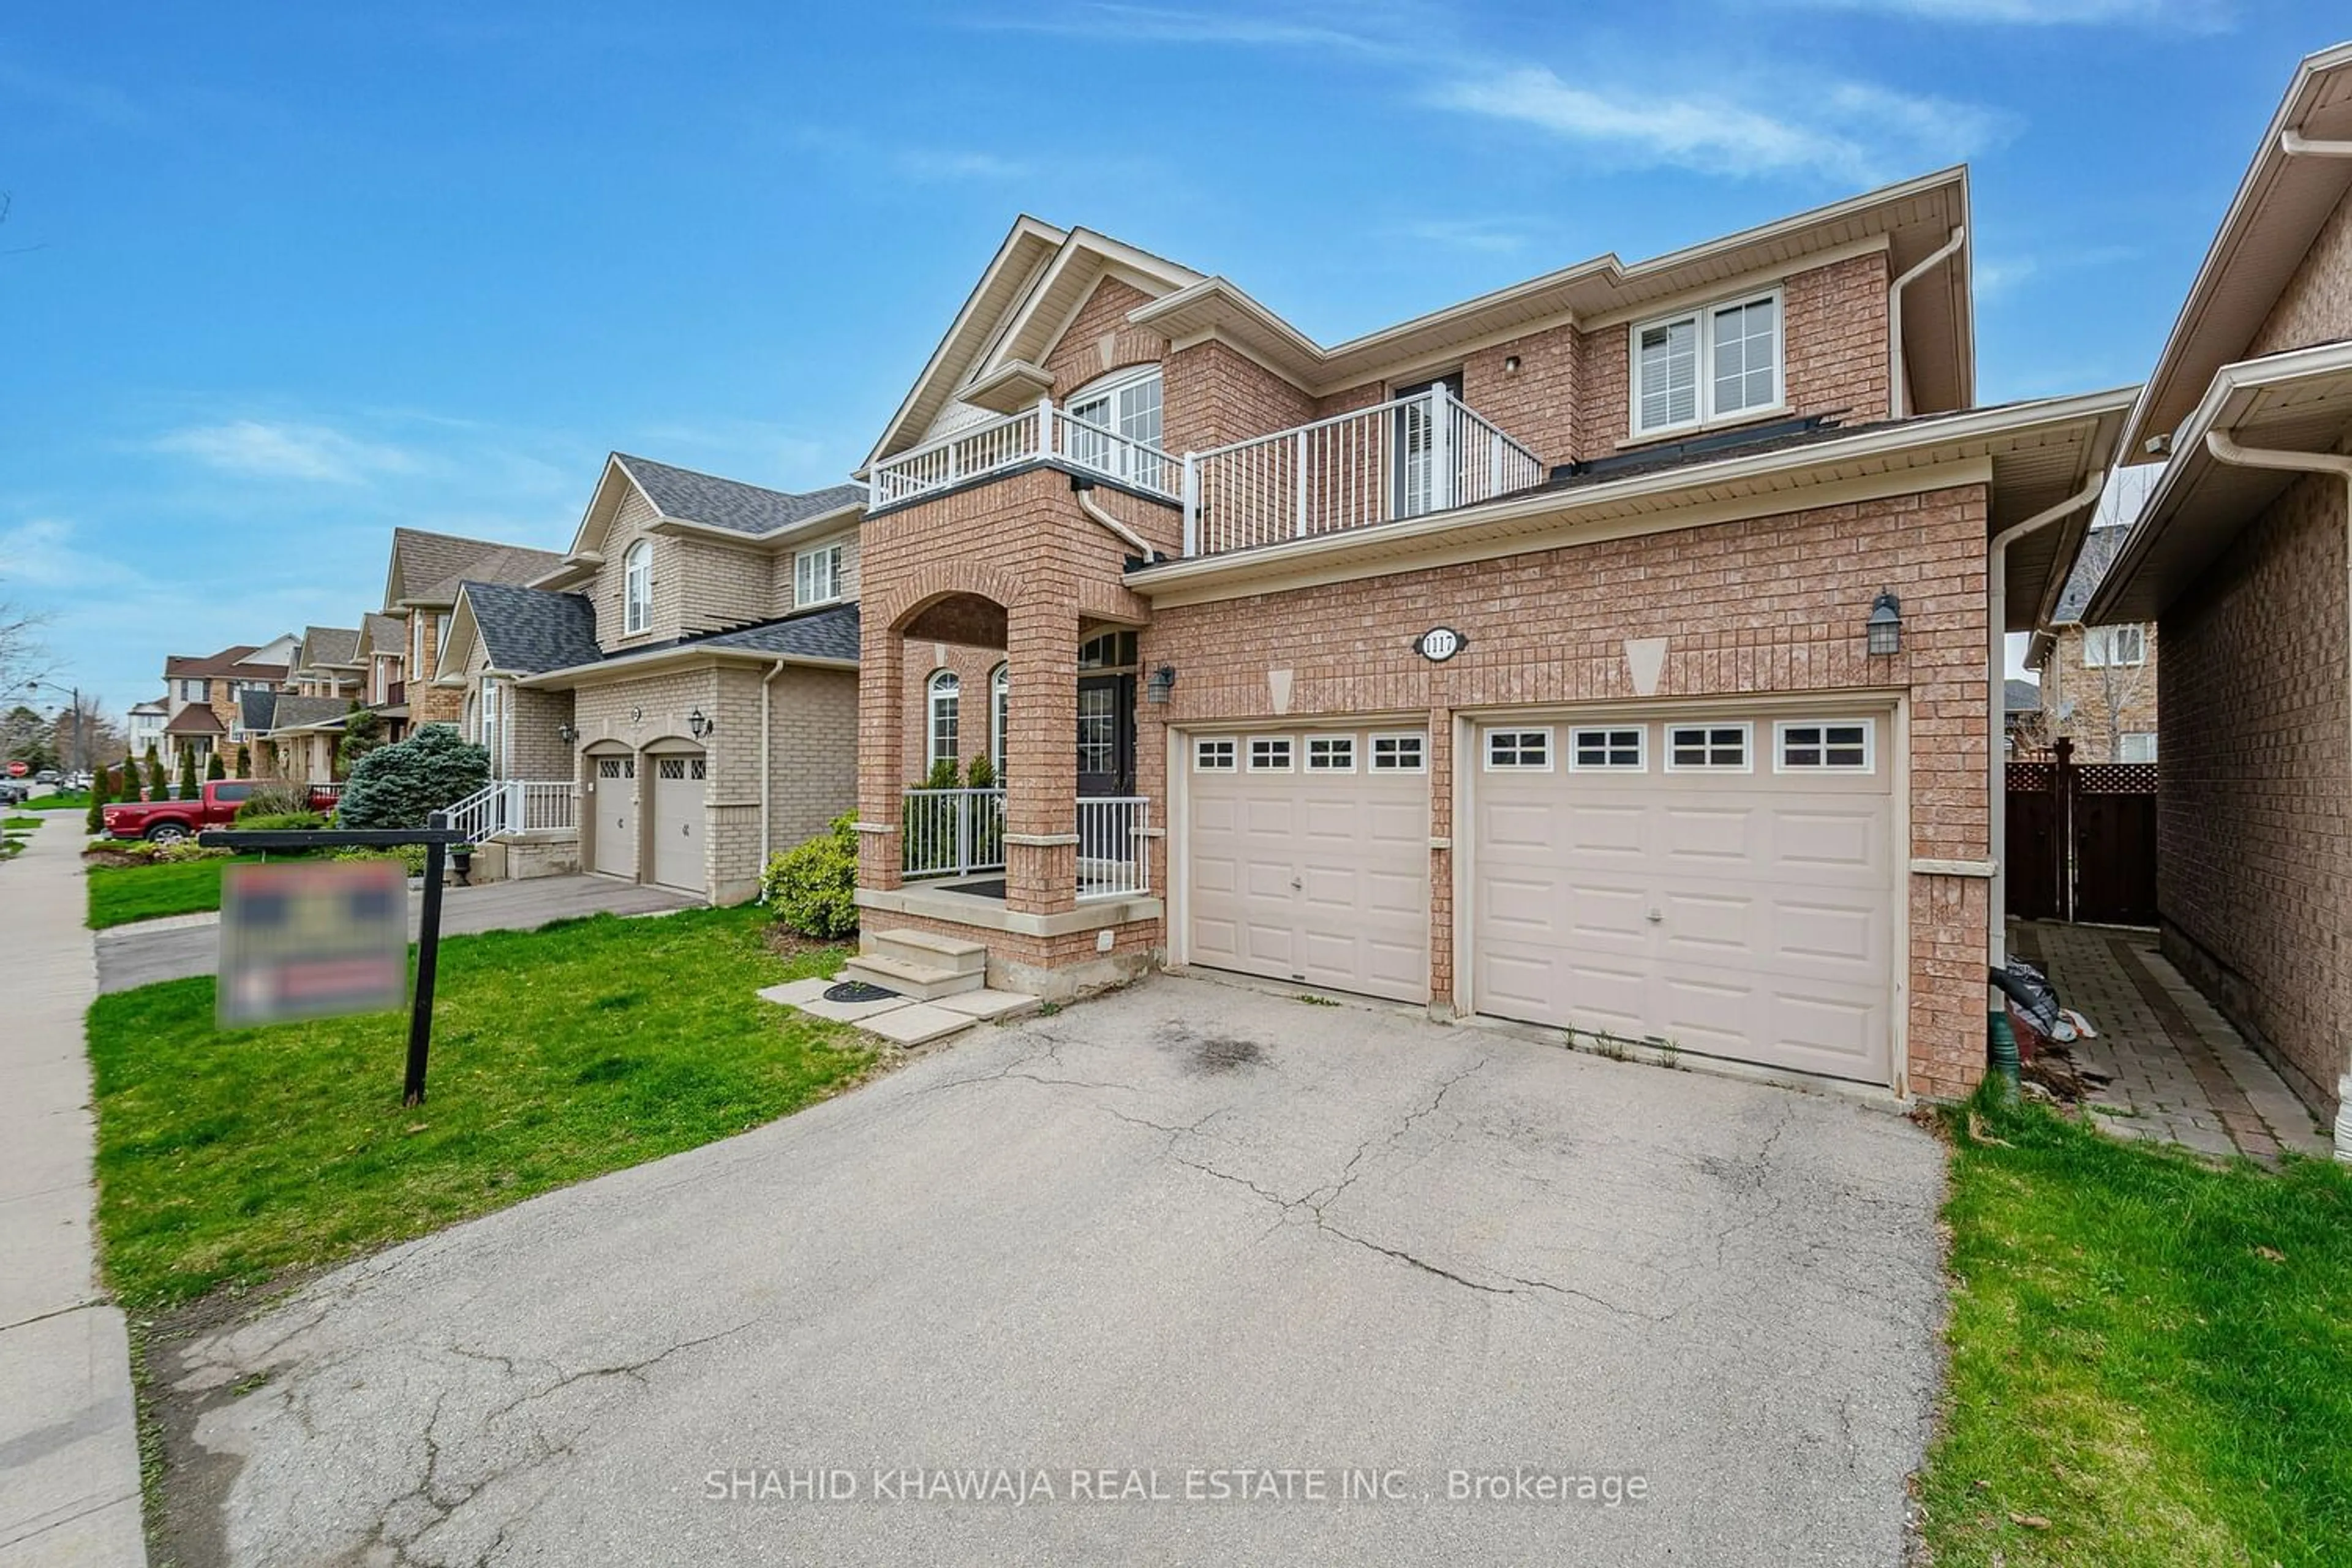 Home with brick exterior material for 1117 Field Dr, Milton Ontario L9T 6G6